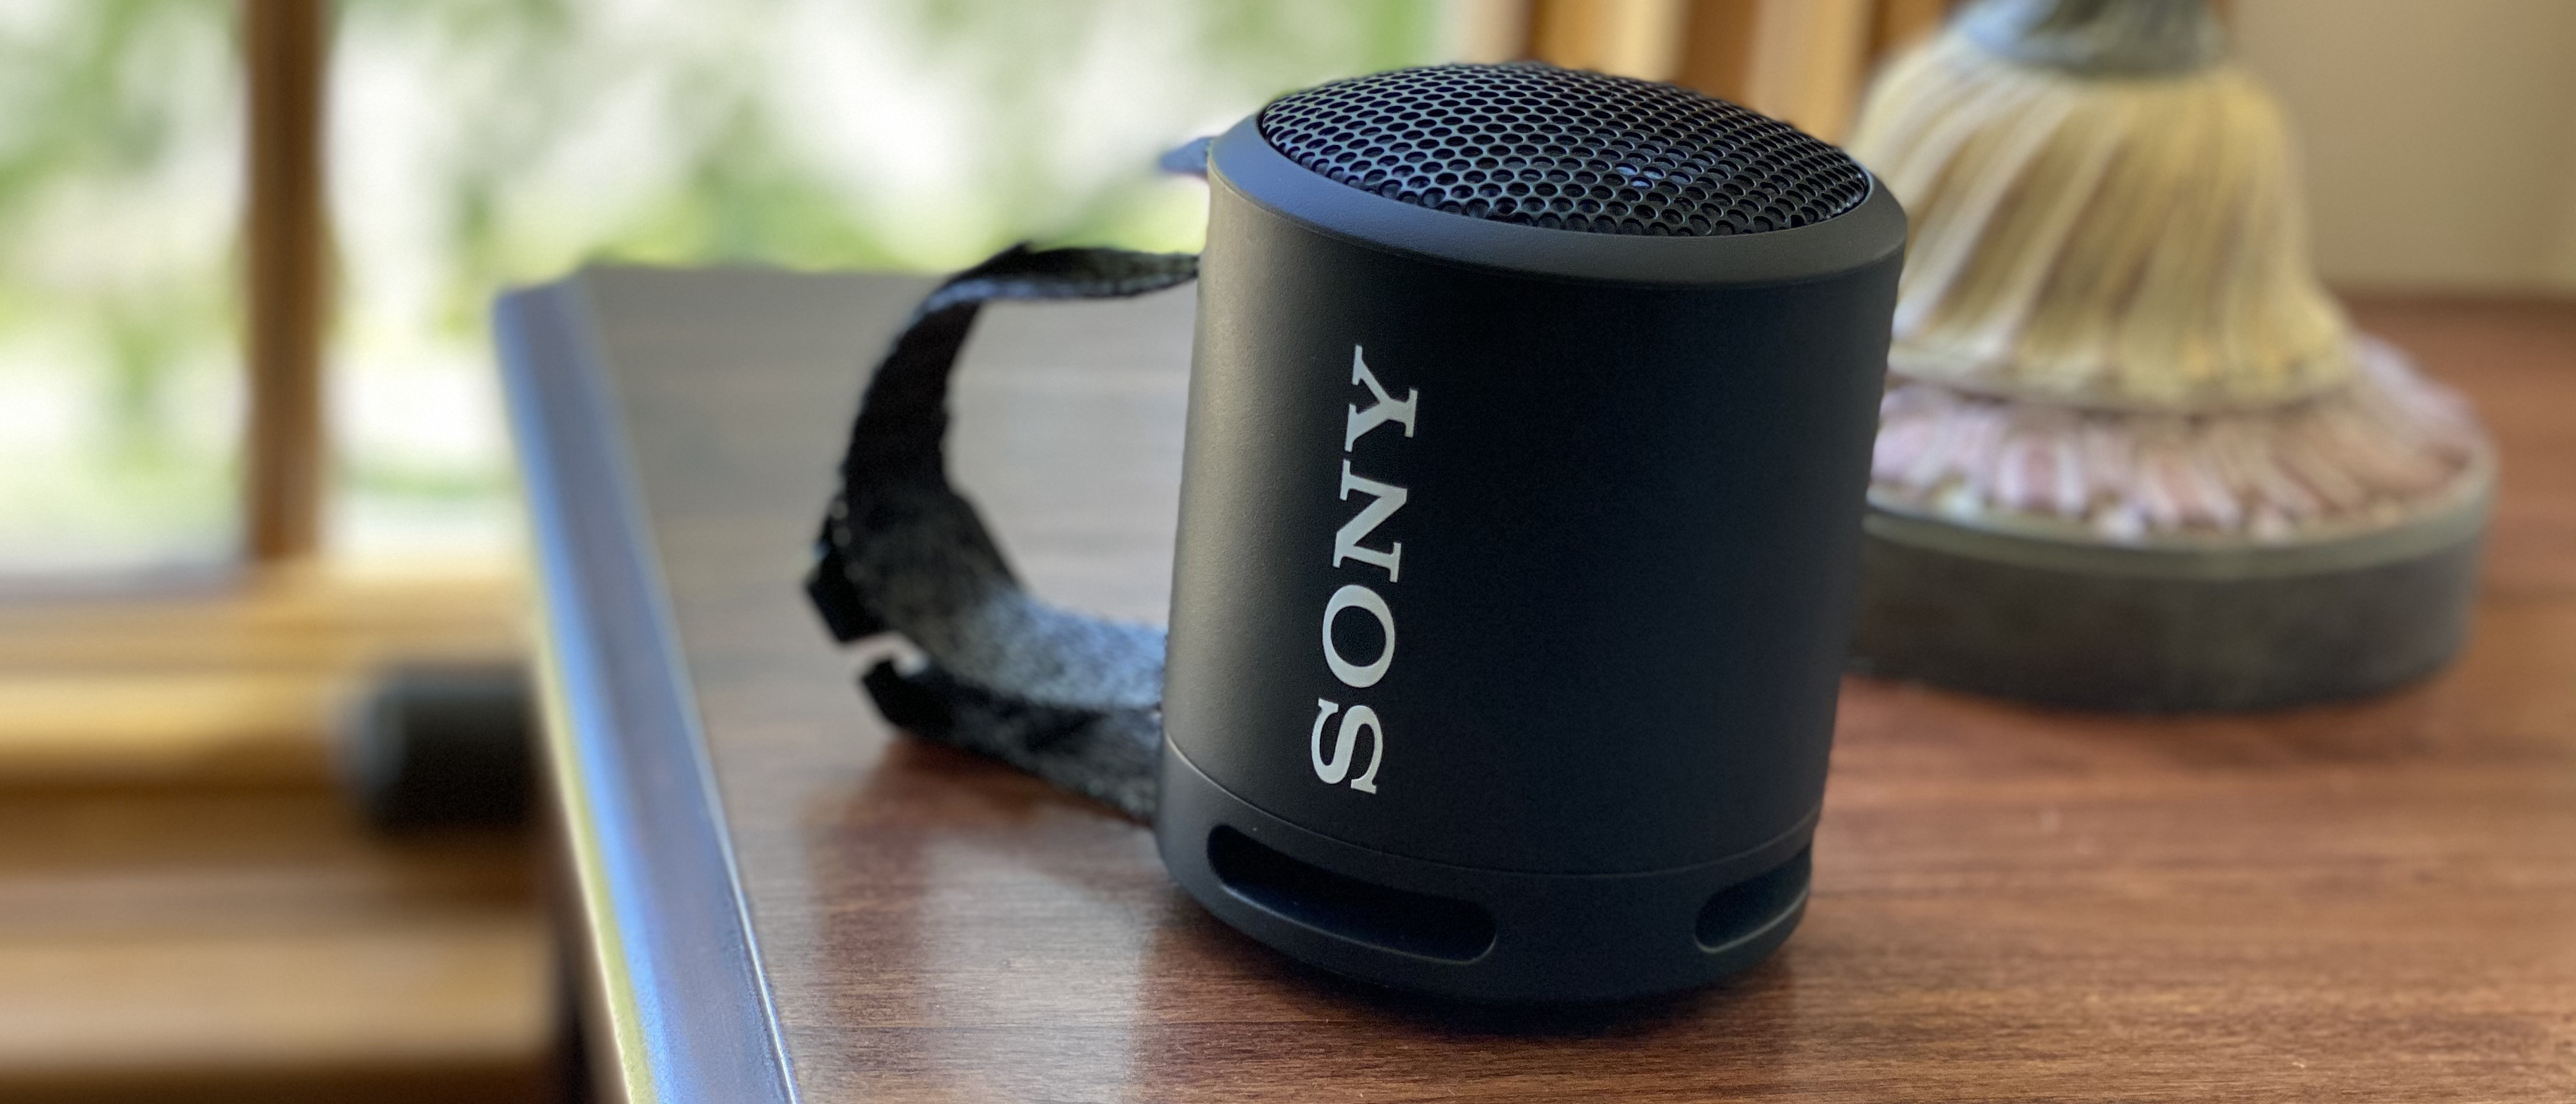 Sony SRS-XB13 review: A take it anywhere, play anything speaker